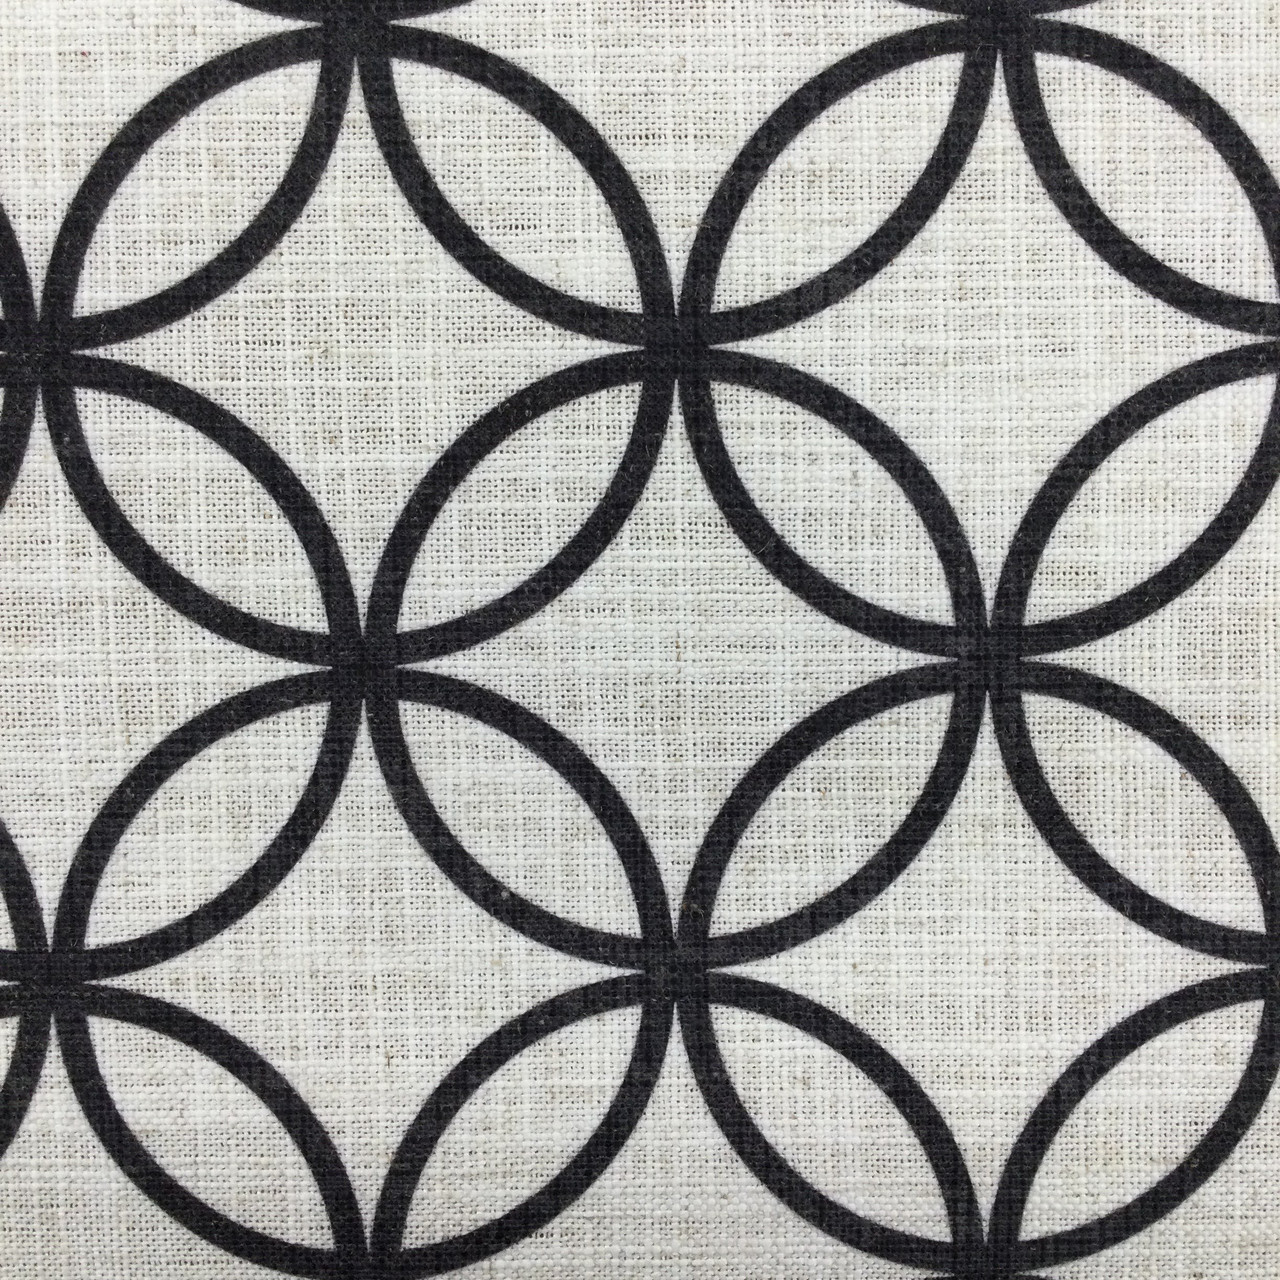 Geometric Circles Black and White Print Fabric | Upholstery / Drapery |  Medium Weight | 54 Wide | By the Yard | Bristol in Black